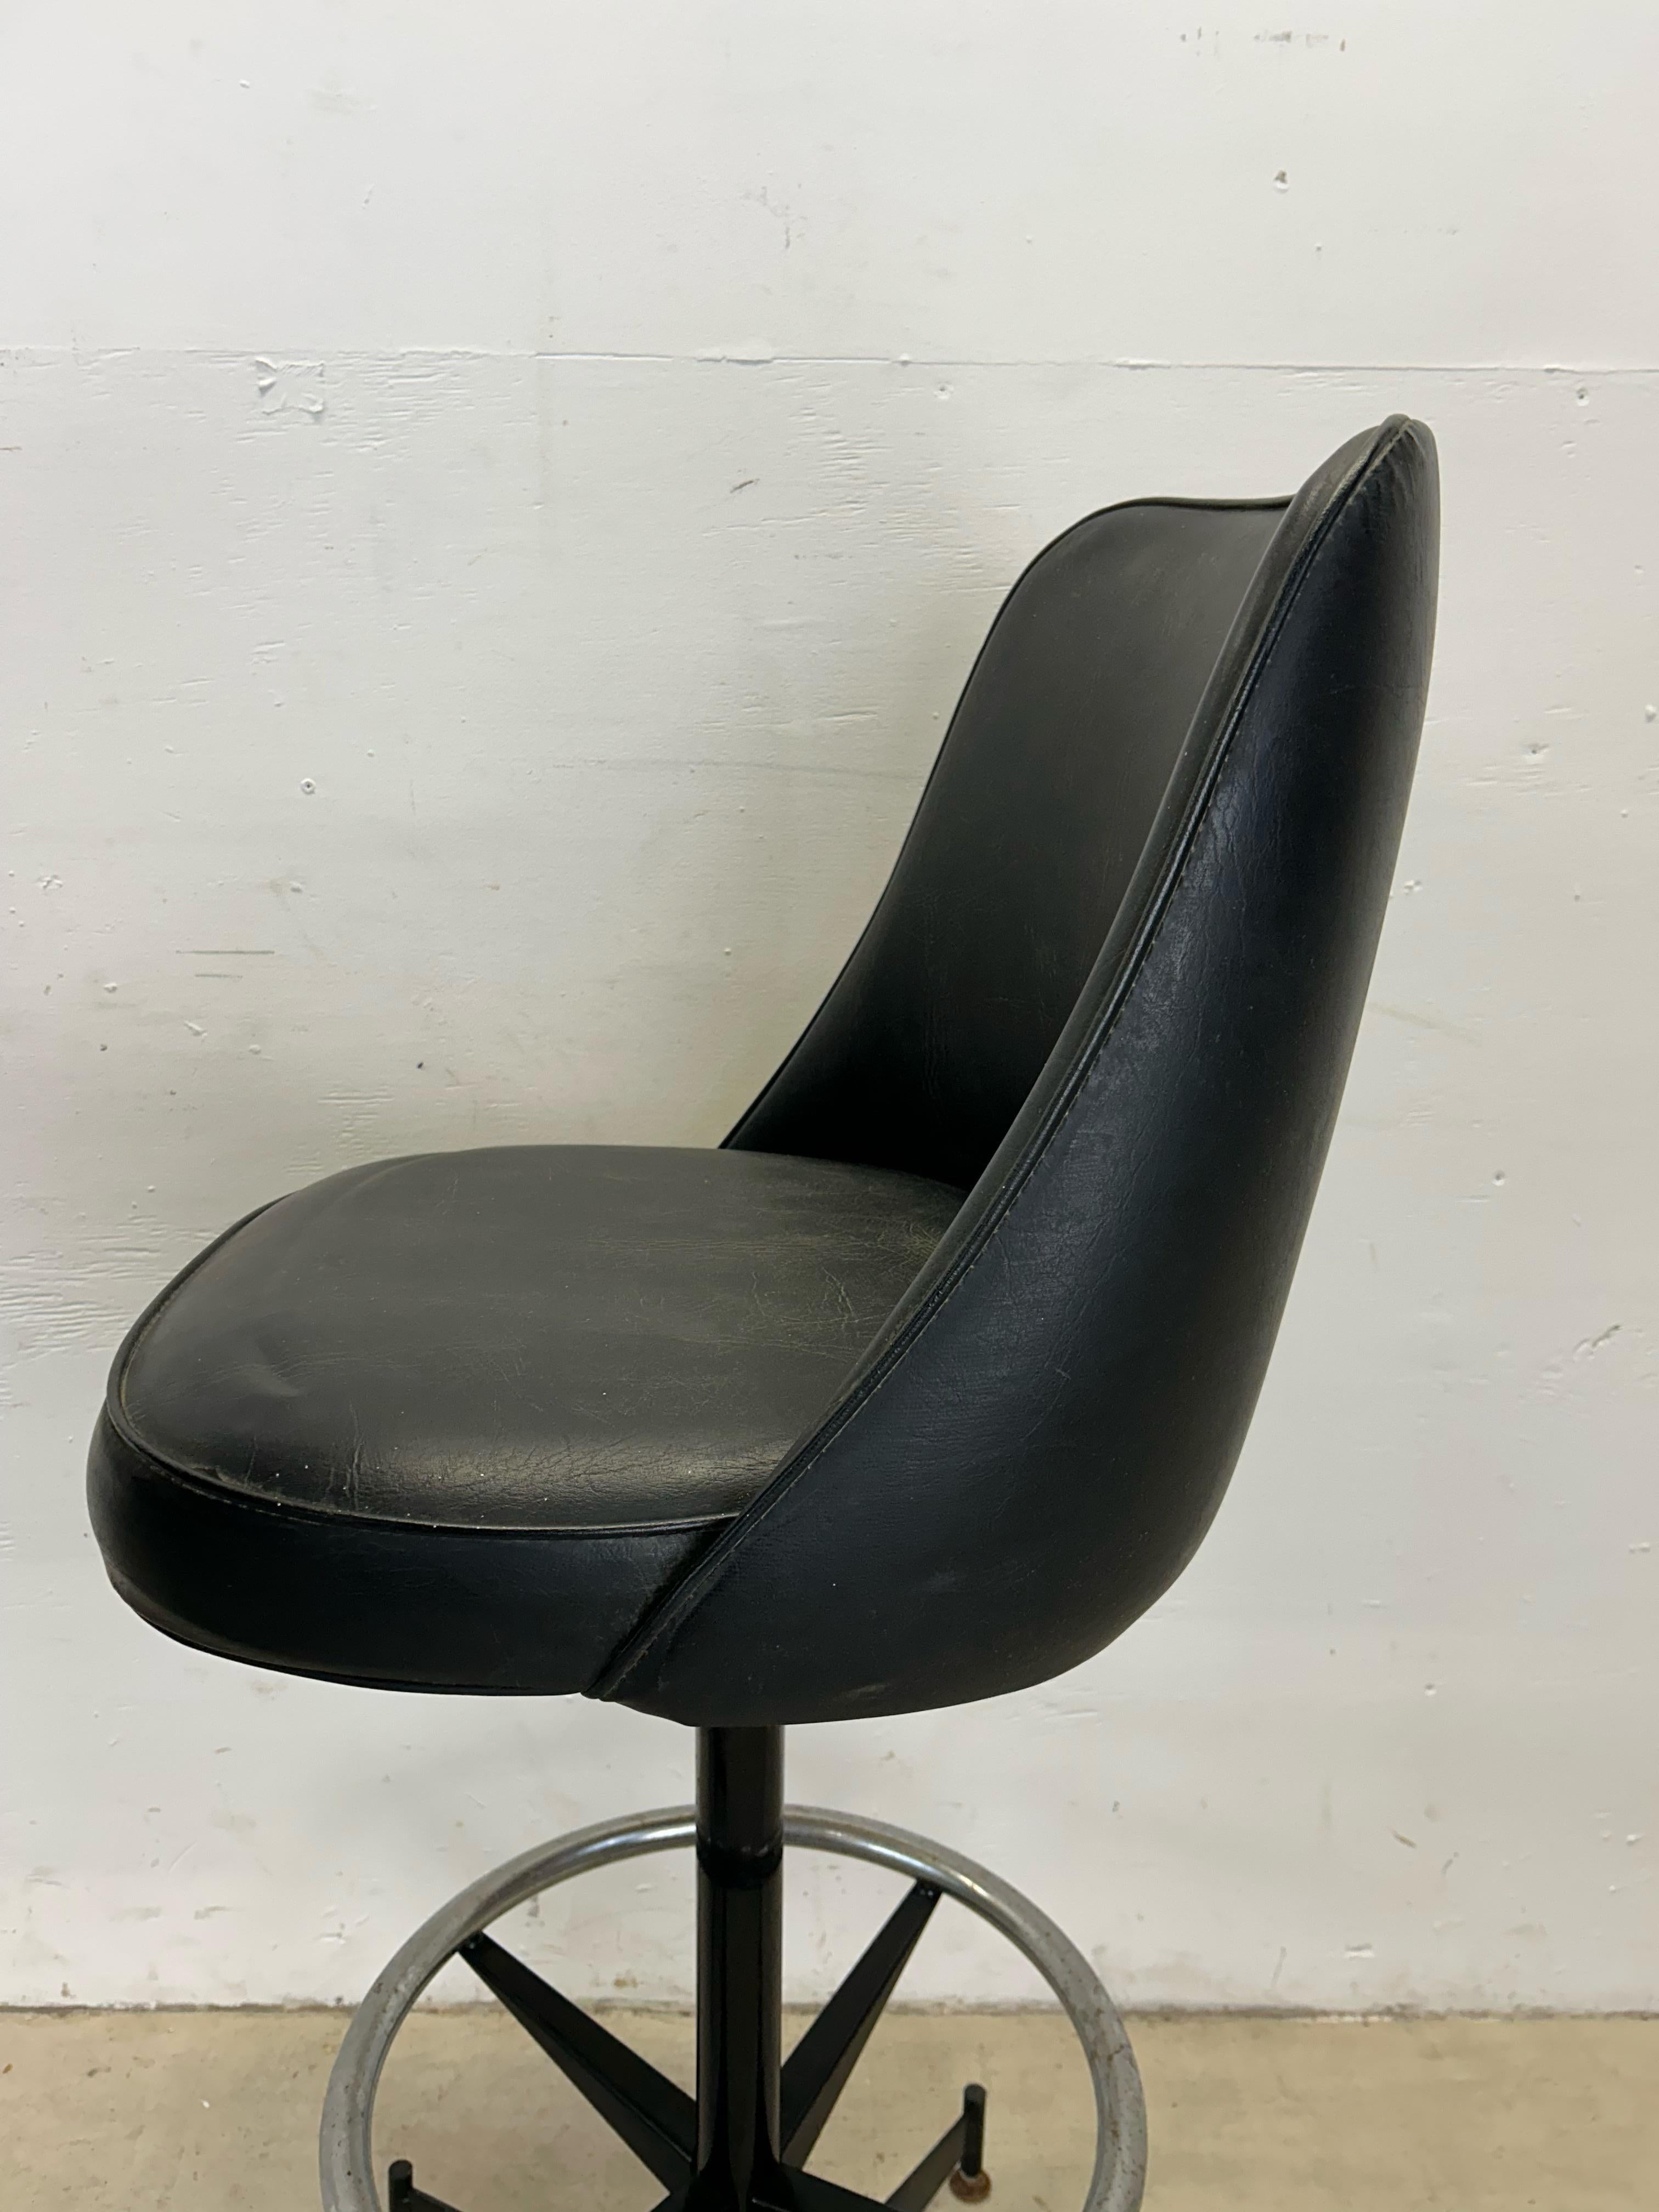 This set of four mid century modern bar stools feature original black vinyl upholstery, swivel seat atop a black painted base, chrome accented kick rail, and chrome feet.

Dimensions: 19w 20d 44h 31sh

Condition: Original black vinyl is seriously